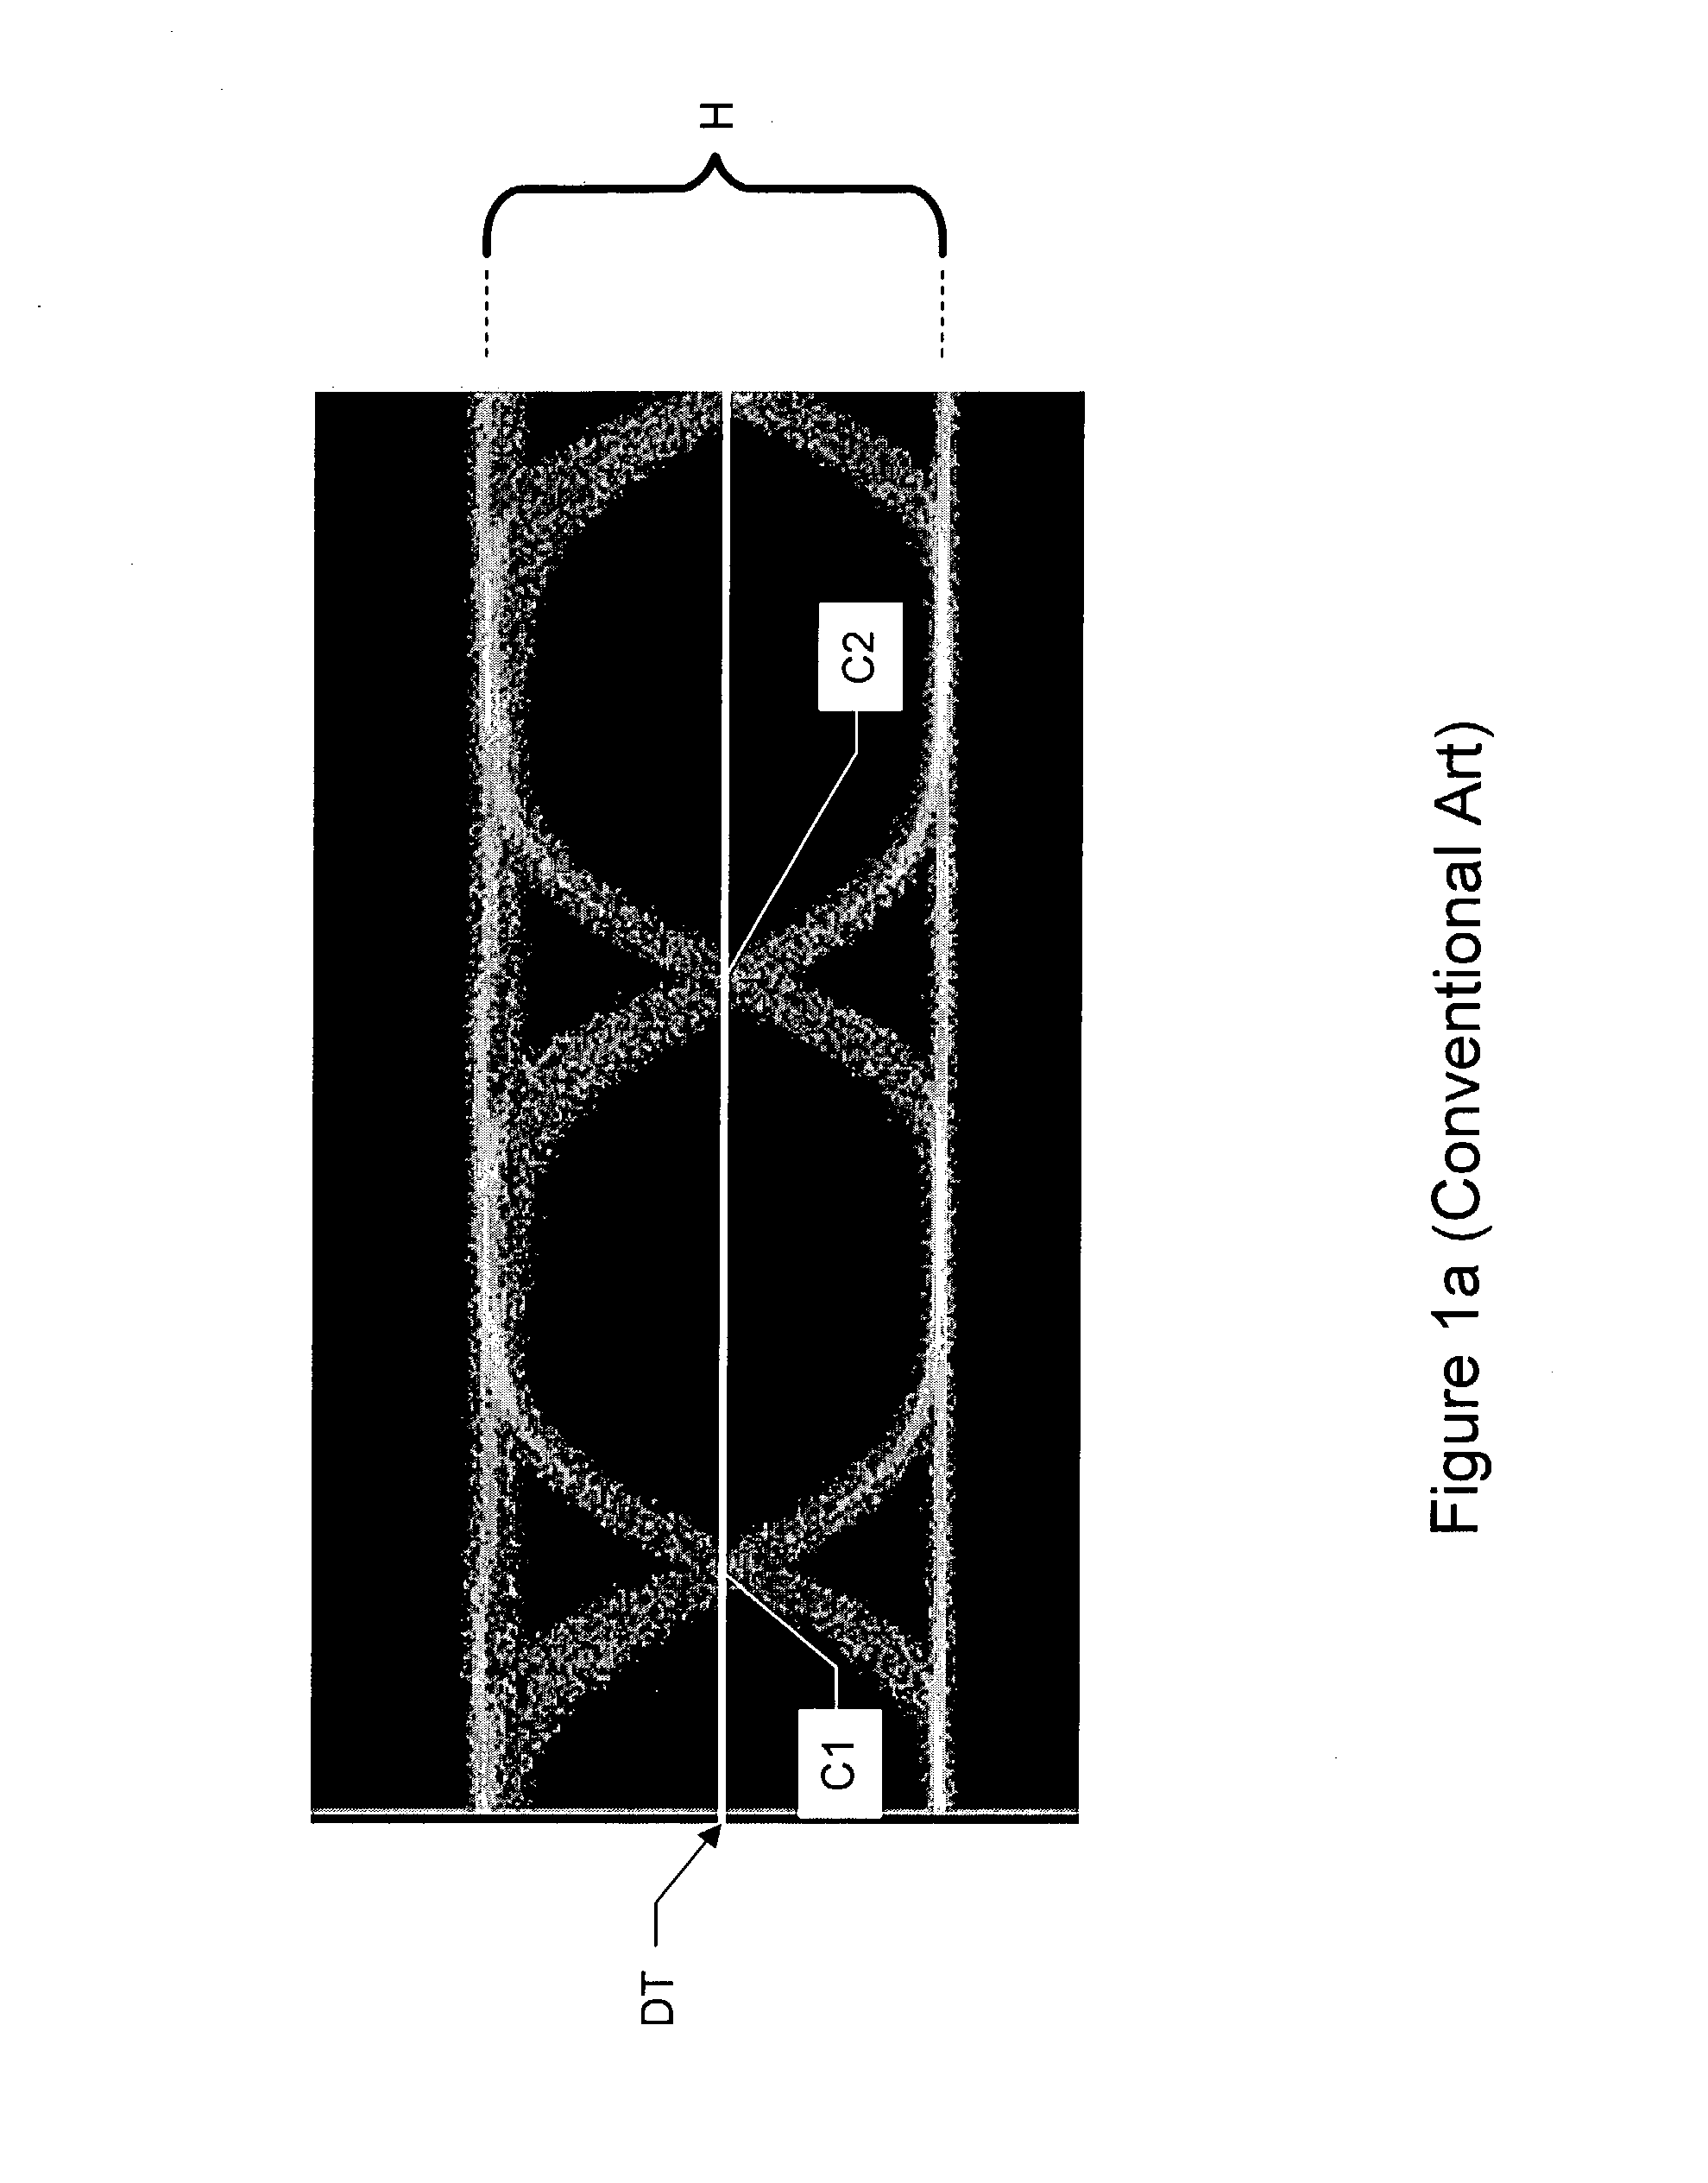 Optical receiver decision threshold tuning apparatus and method